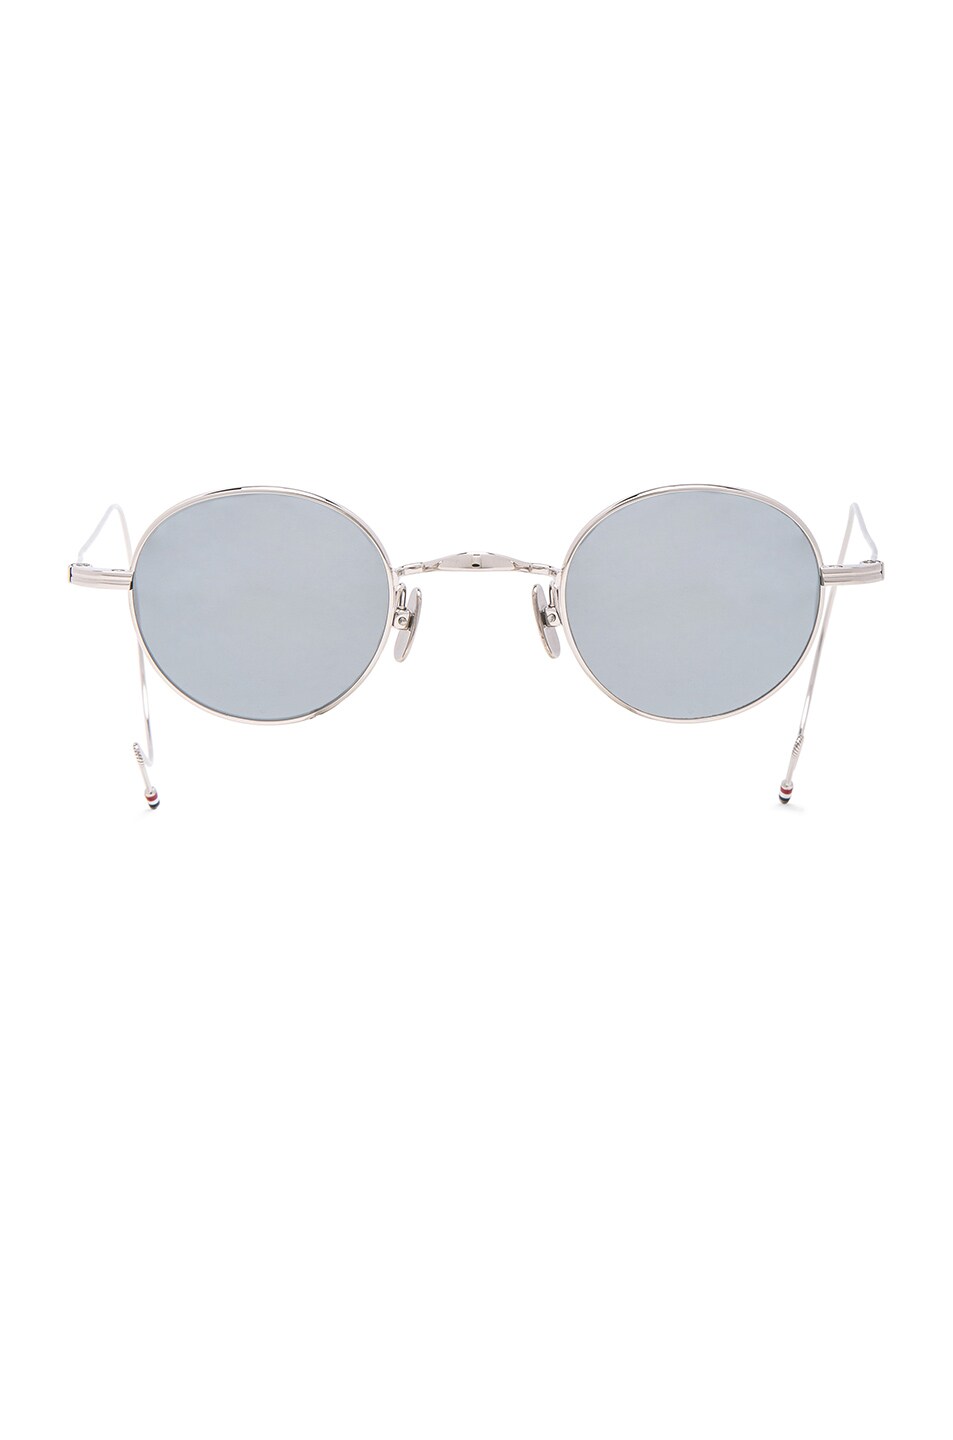 Image 1 of Thom Browne Limited Edition Round Sunglasses in Silver & Dark Grey